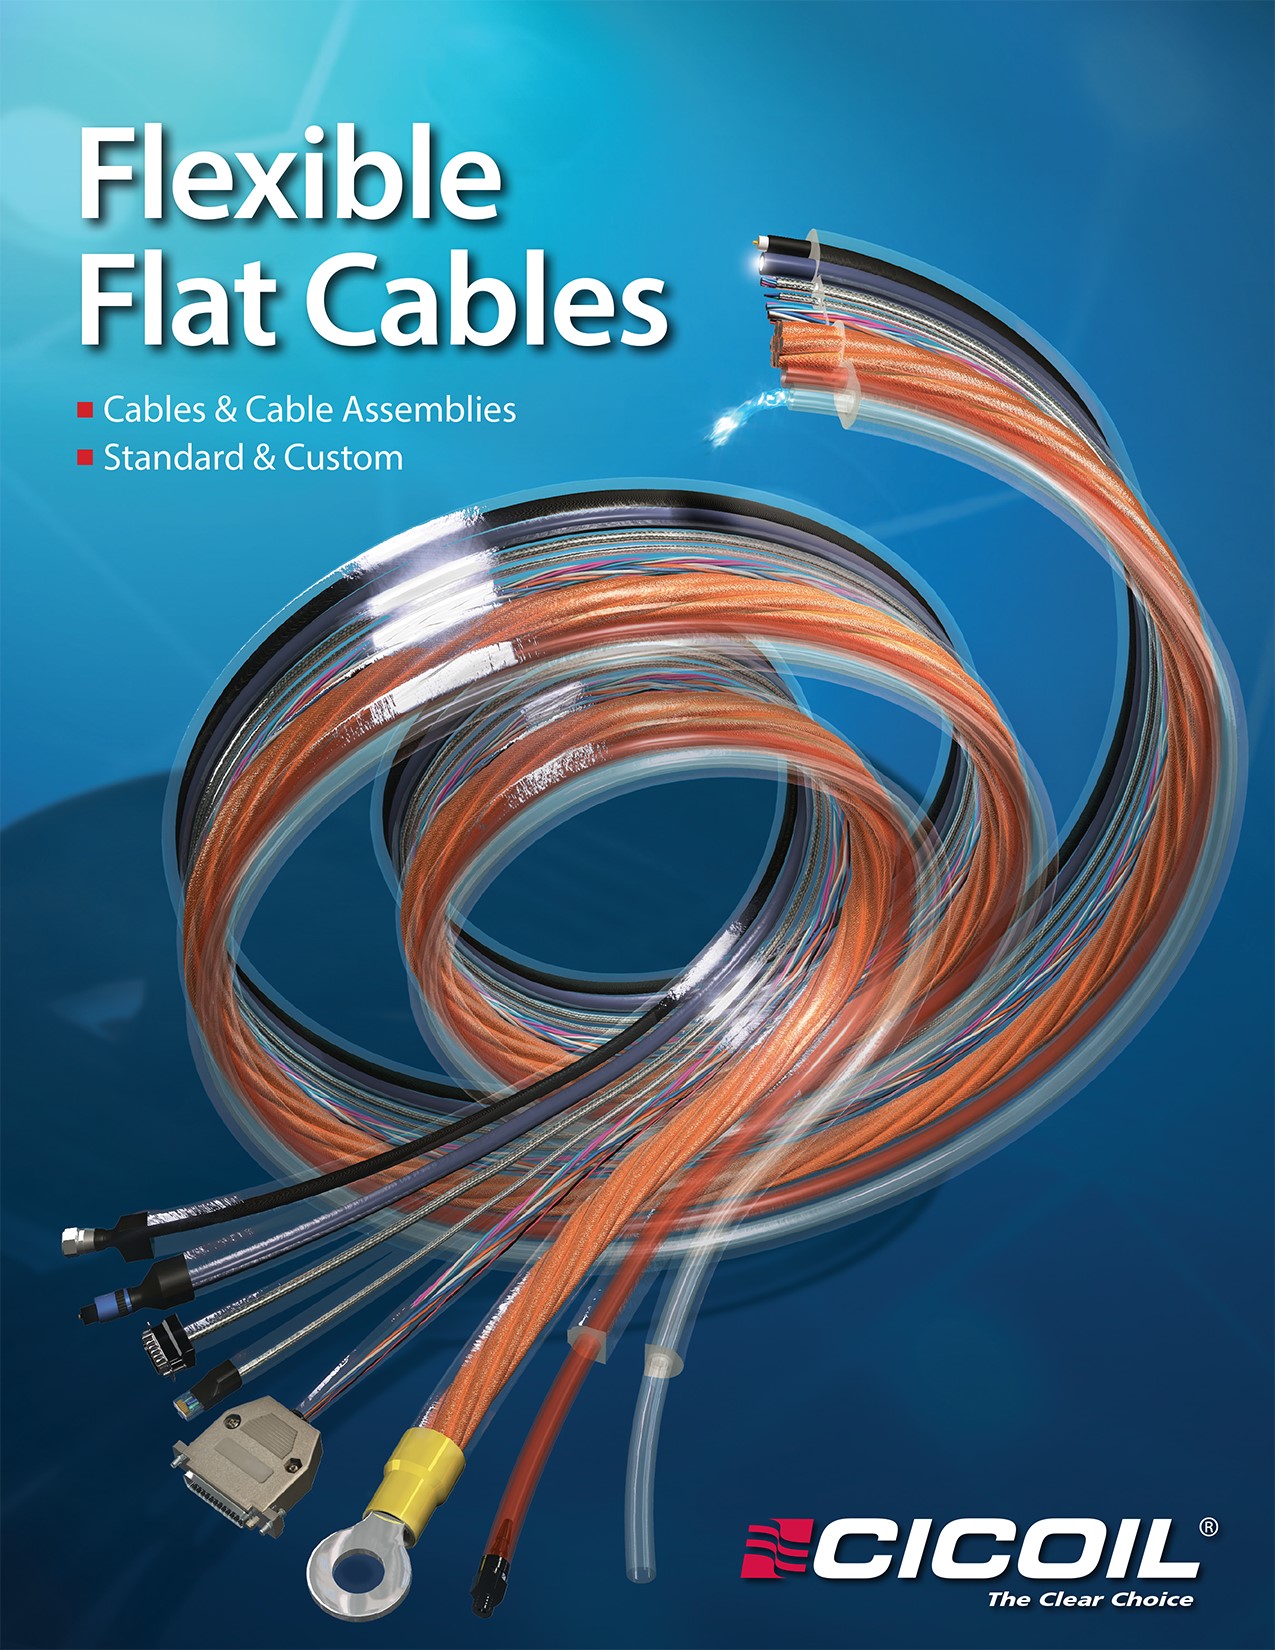 New Cicoil Flat Cable Catalog